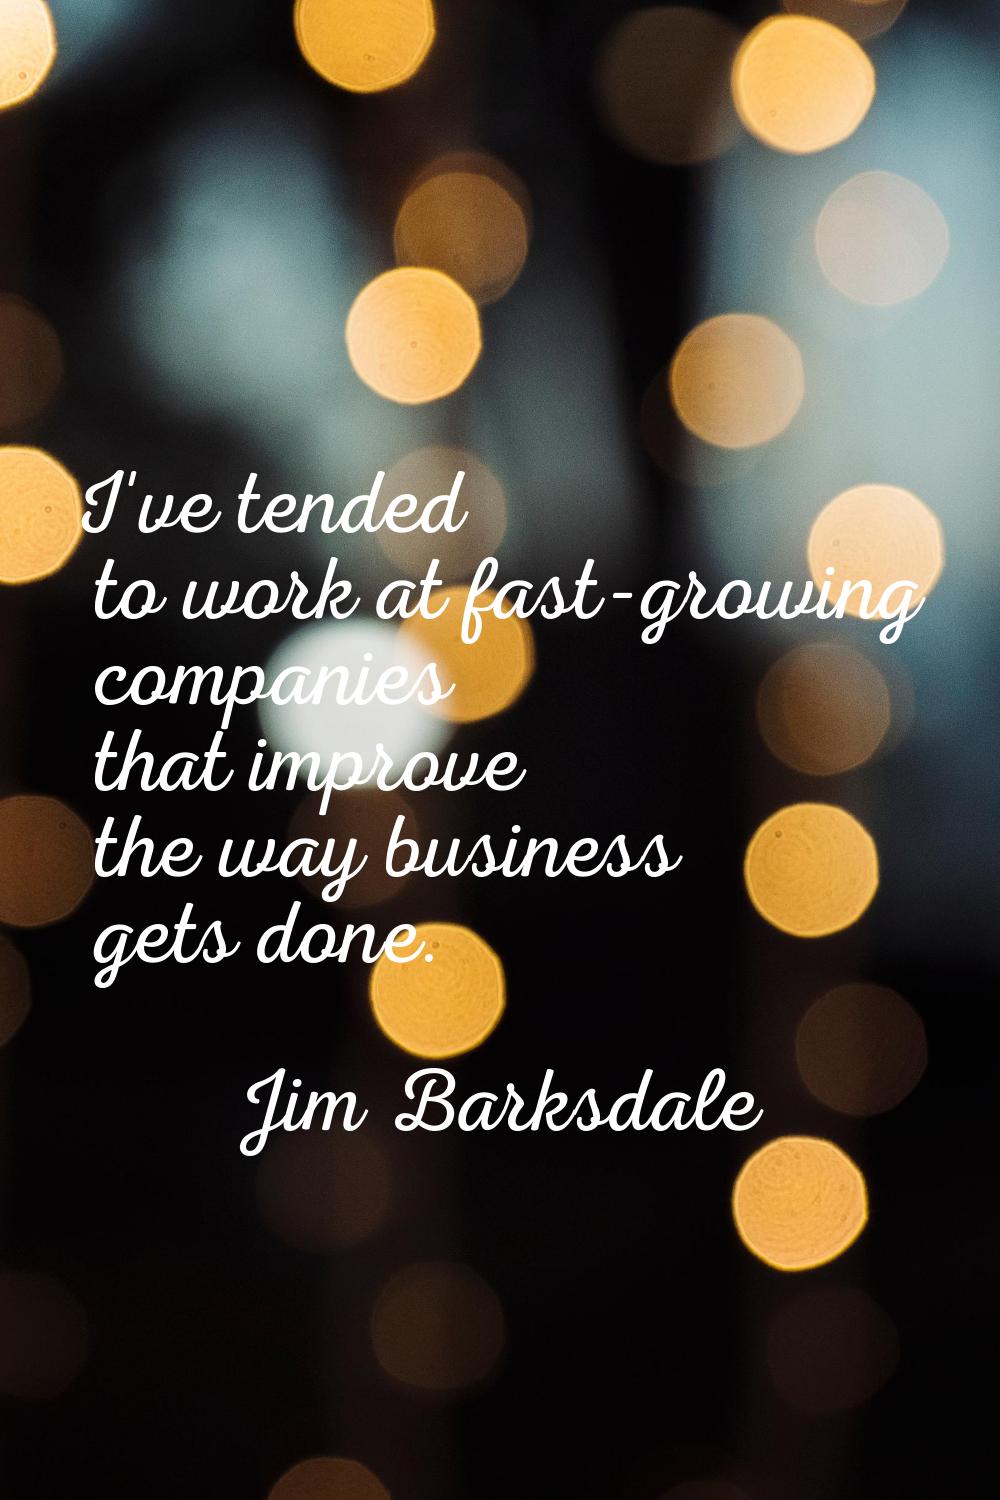 I've tended to work at fast-growing companies that improve the way business gets done.